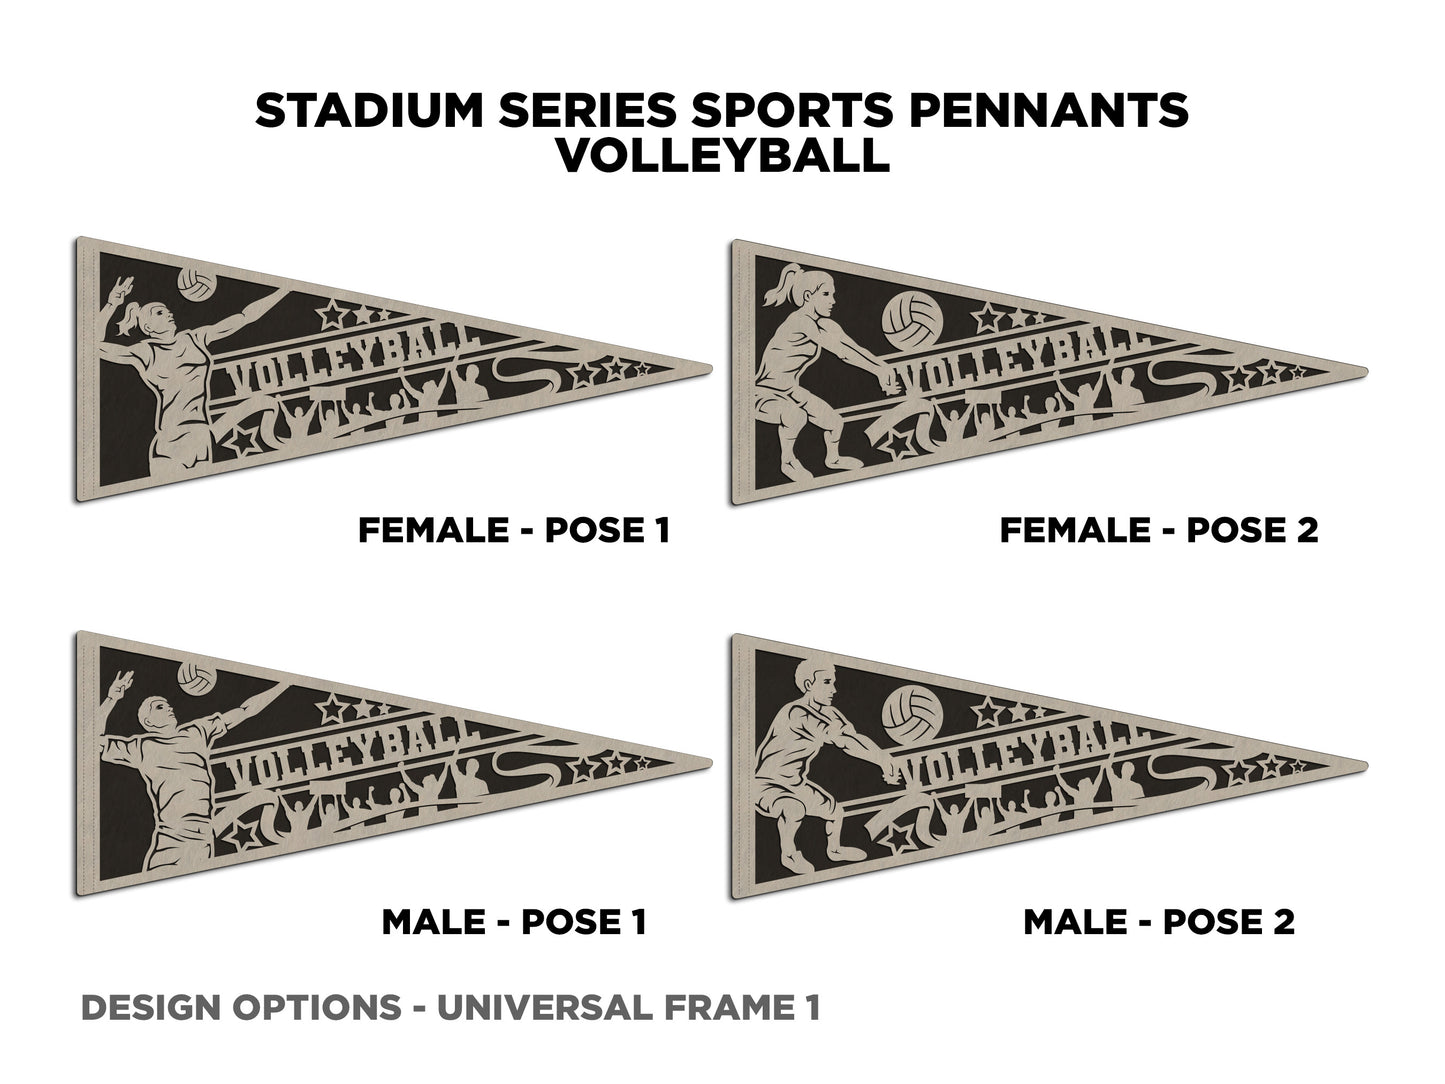 Stadium Series Sports Pennants - Volleyball - 12 Variations Included - Male and Female Options - Tested on Glowforge & Lightburn